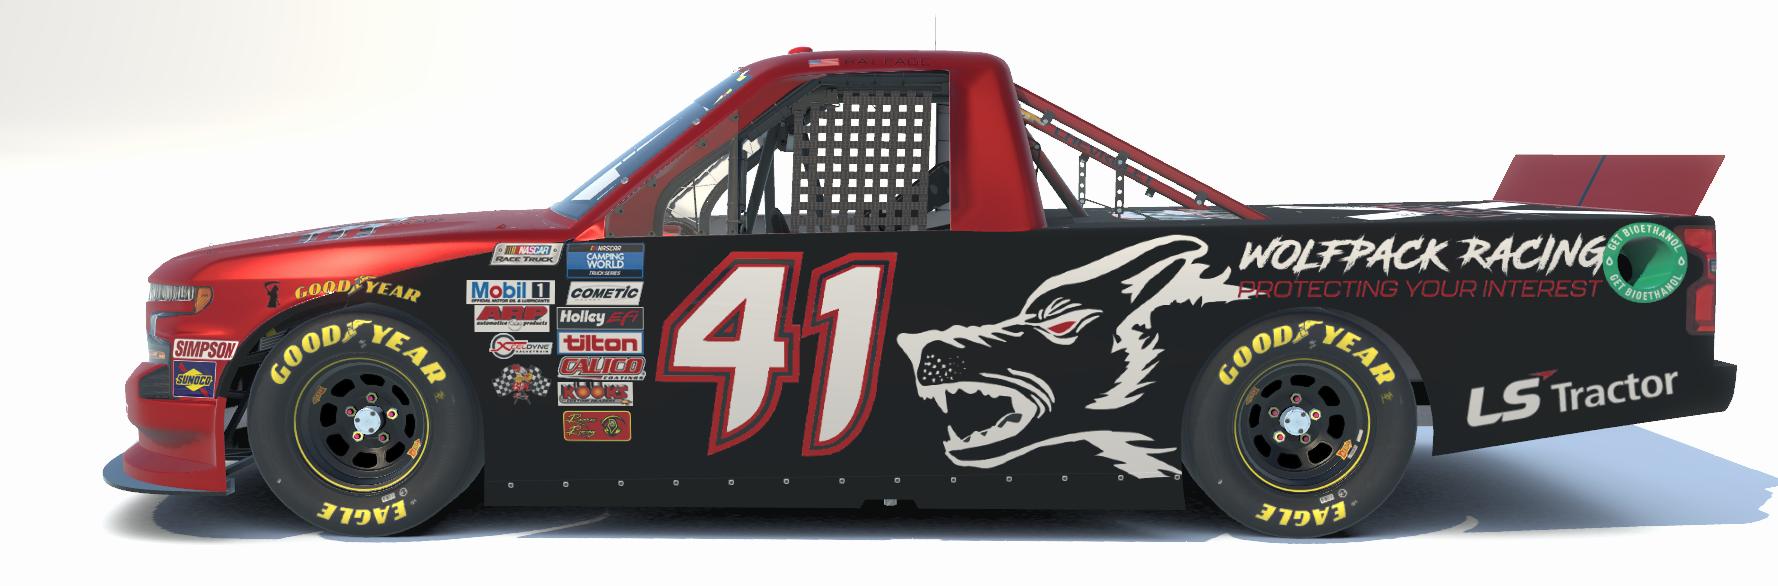 Preview of WolfPack Racing #41 Ray Page by Garet K.